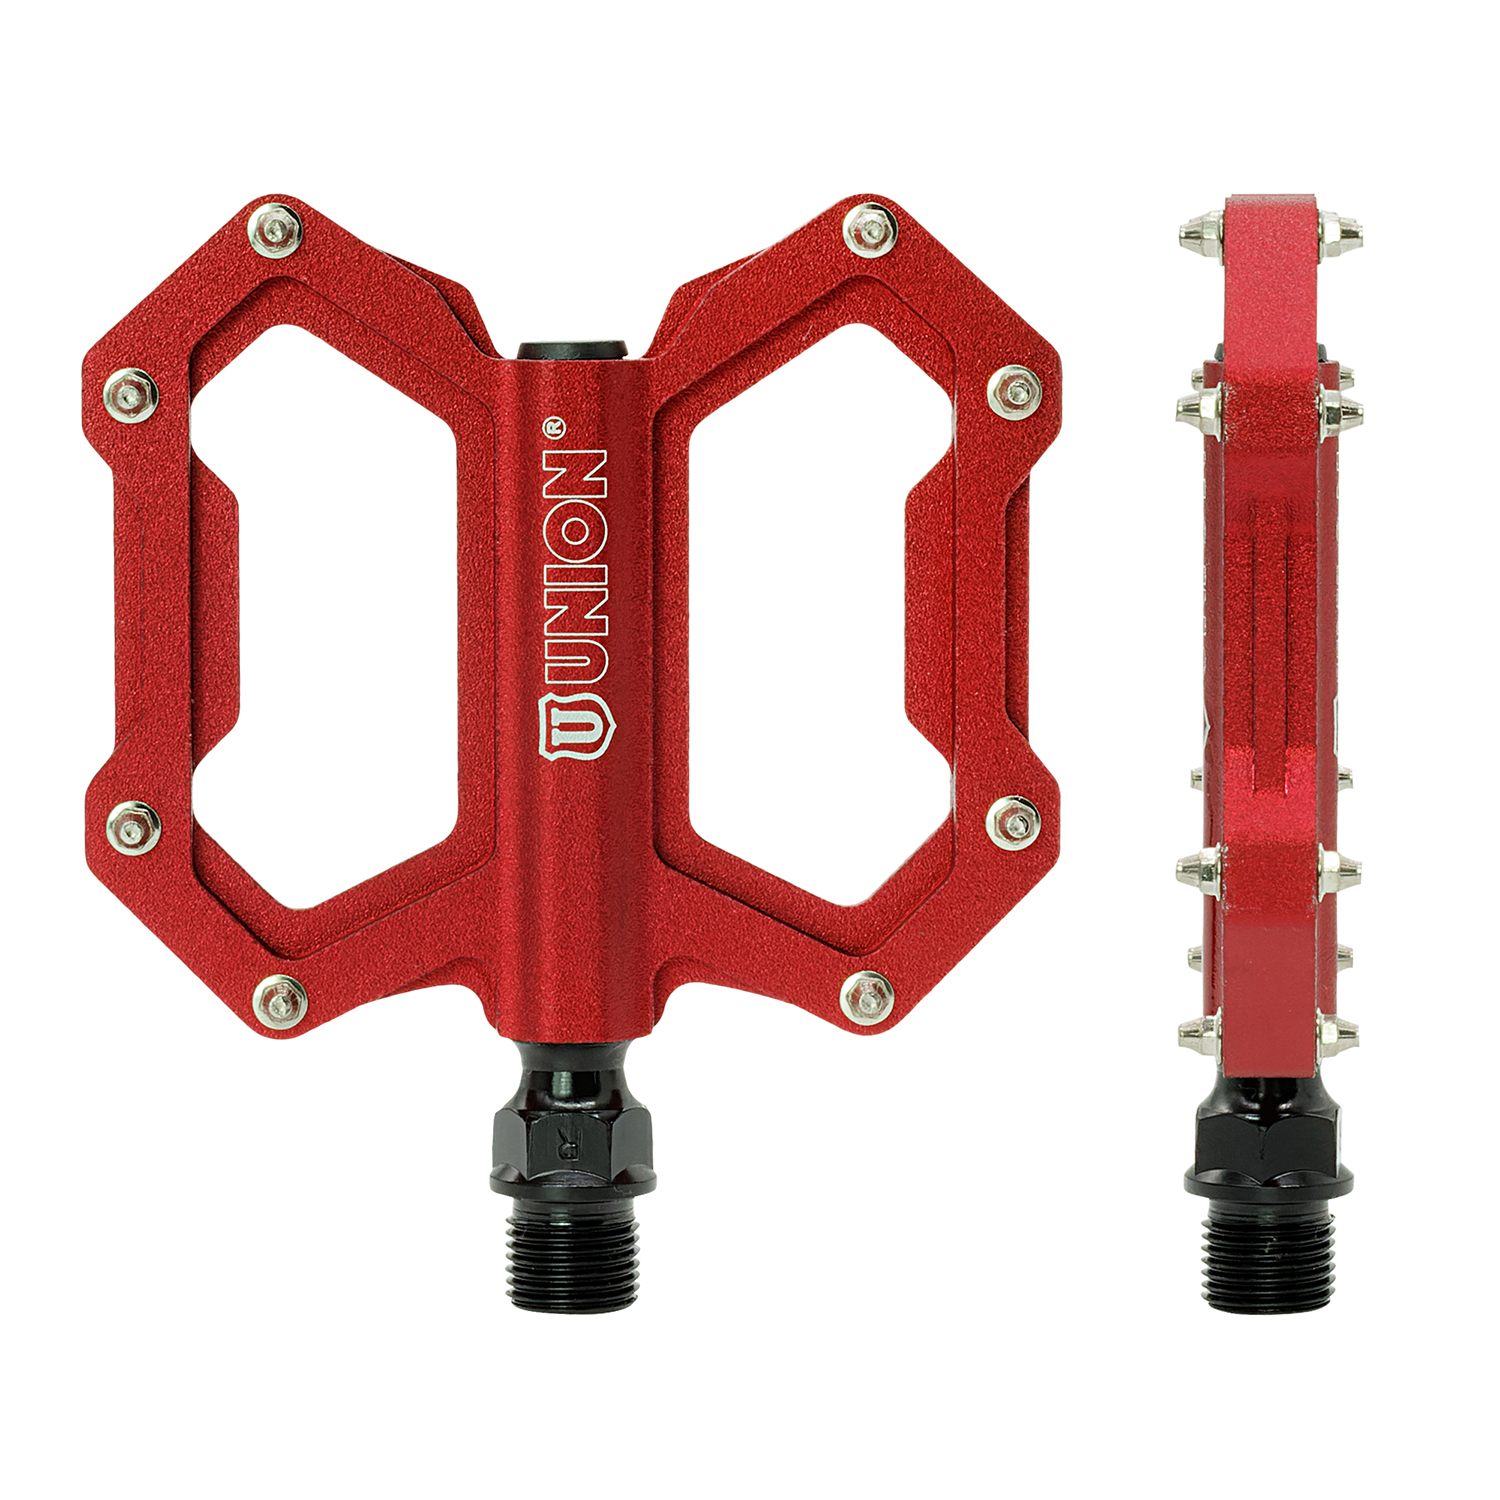 BMX-Pedal ALU UNION SP 1210 Nadellager in Rot